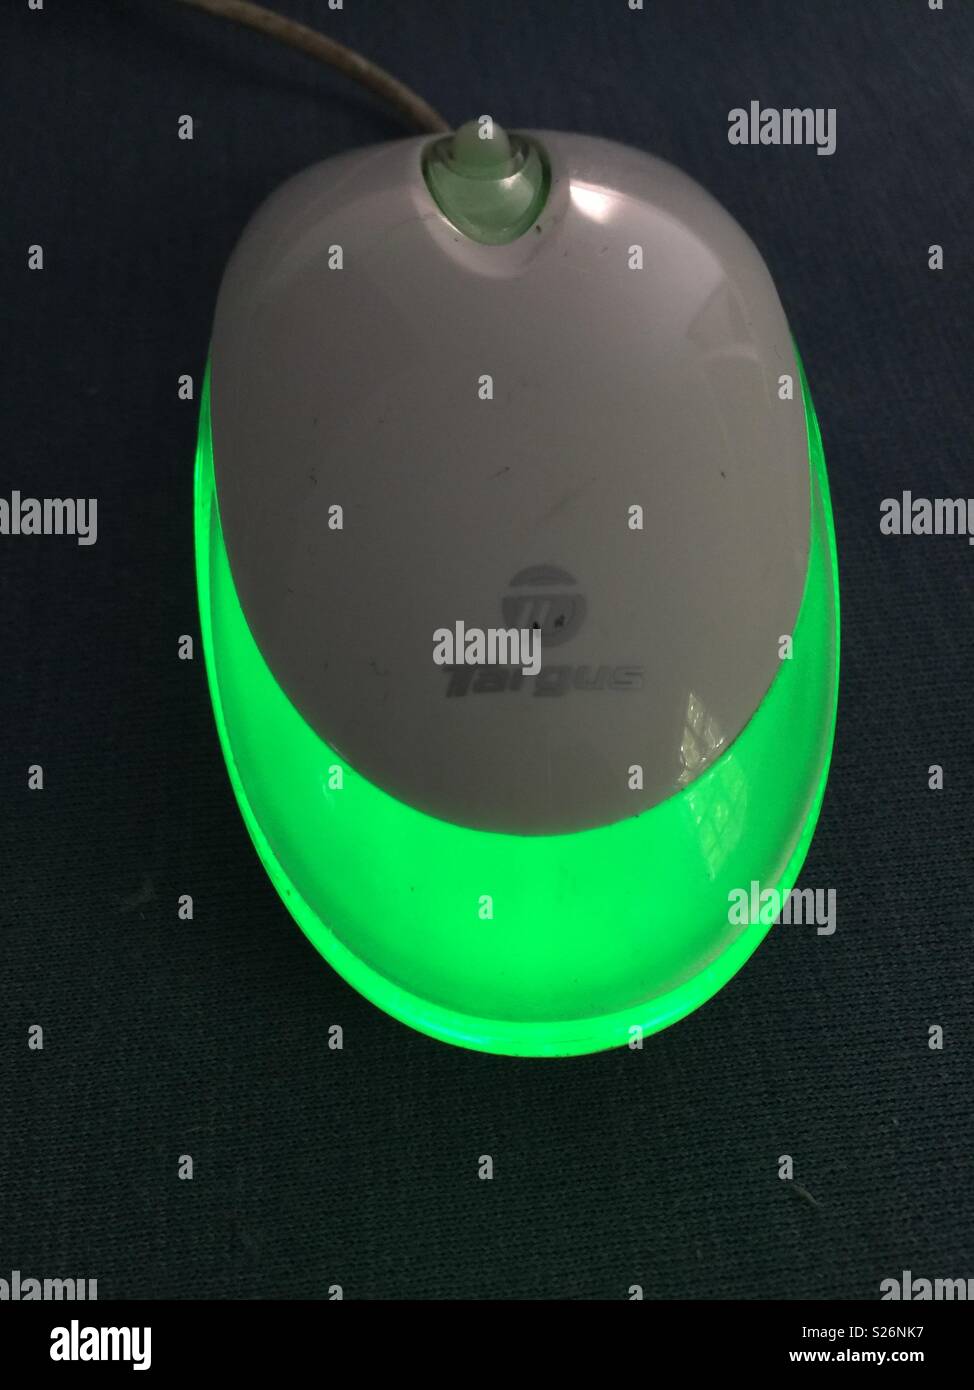 Green optical mouse Stock Photo